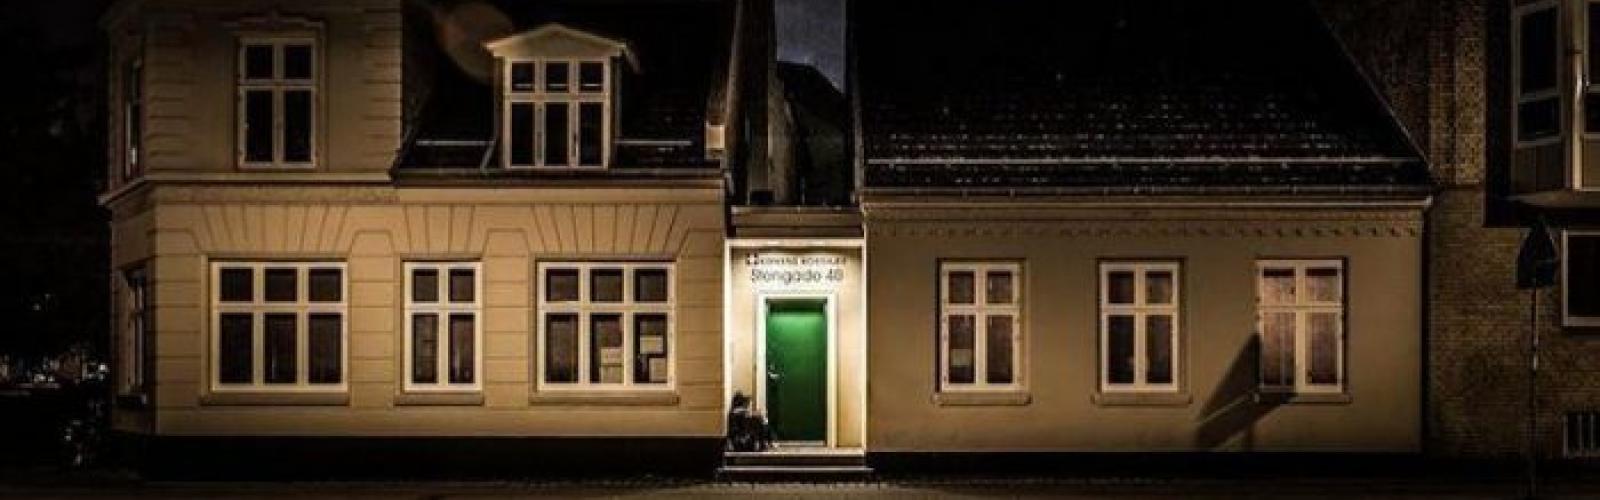 Natcafeen front by night